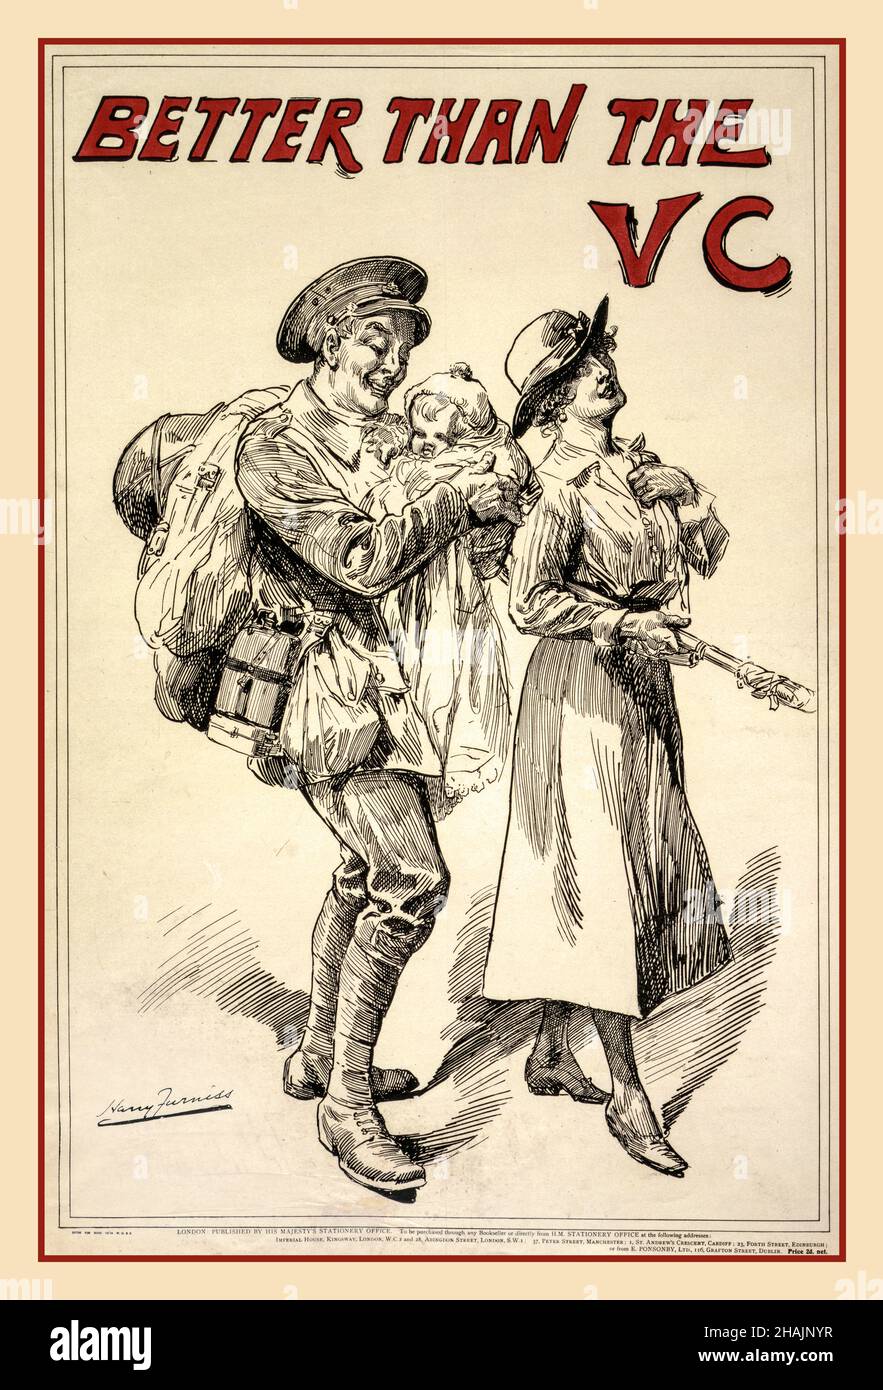 WW1 British Propaganda Poster 1918 showing a soldier holding a baby, as he follows his wife. with slogan 'Better Than The VC' Furniss, Harry, 1854-1925, artist Better than the V.C. [i.e., Victoria Cross] / Harry Furniss. Stock Photo